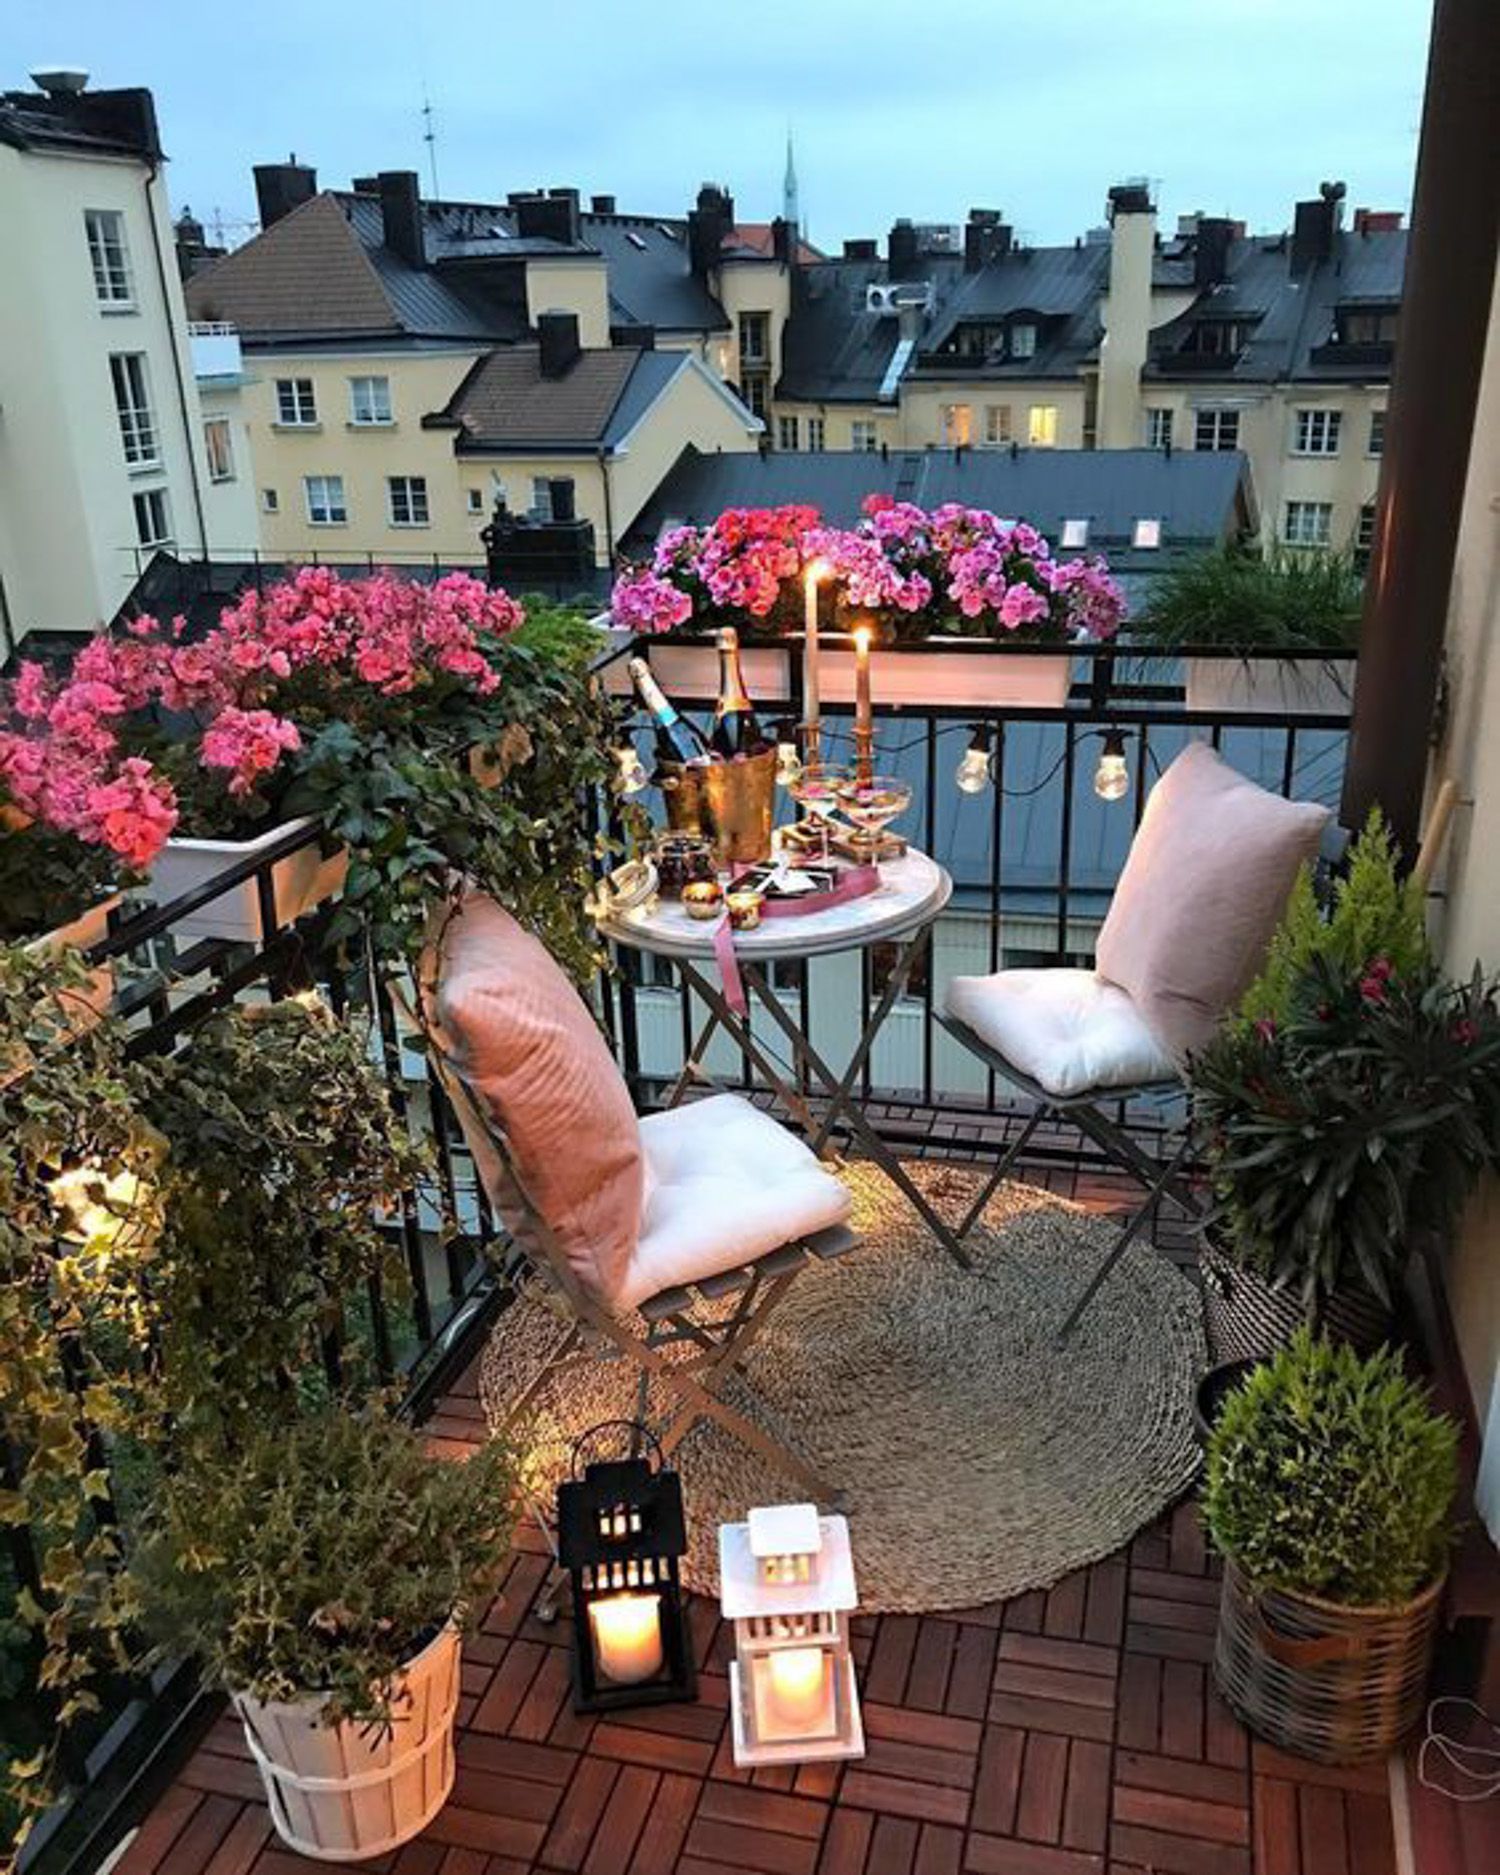 And Lovely Balcony Transform Your Outdoor Space with a Beautiful Balcony Retreat